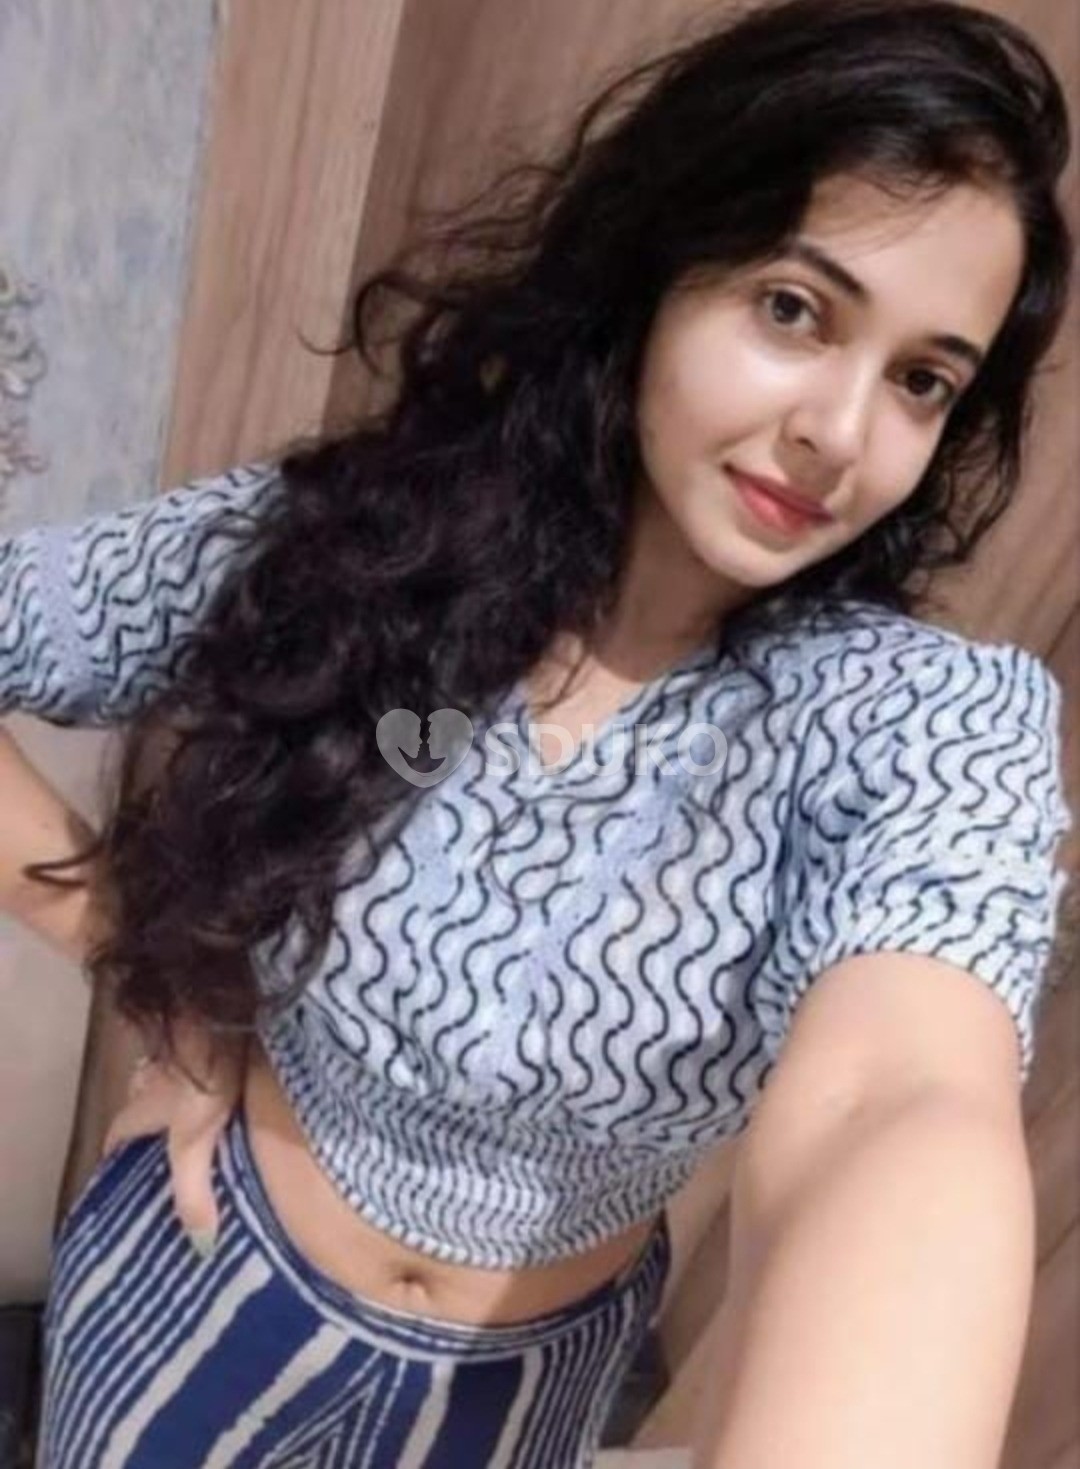 Chhatarpur LOW PRICE🔸v✅( 24×7 ) SERVICE A AVAILABLE 100% SAFE AND S SECURE UNLIMITED ENJOY HOT COLLEGE GIRL HOUSEW